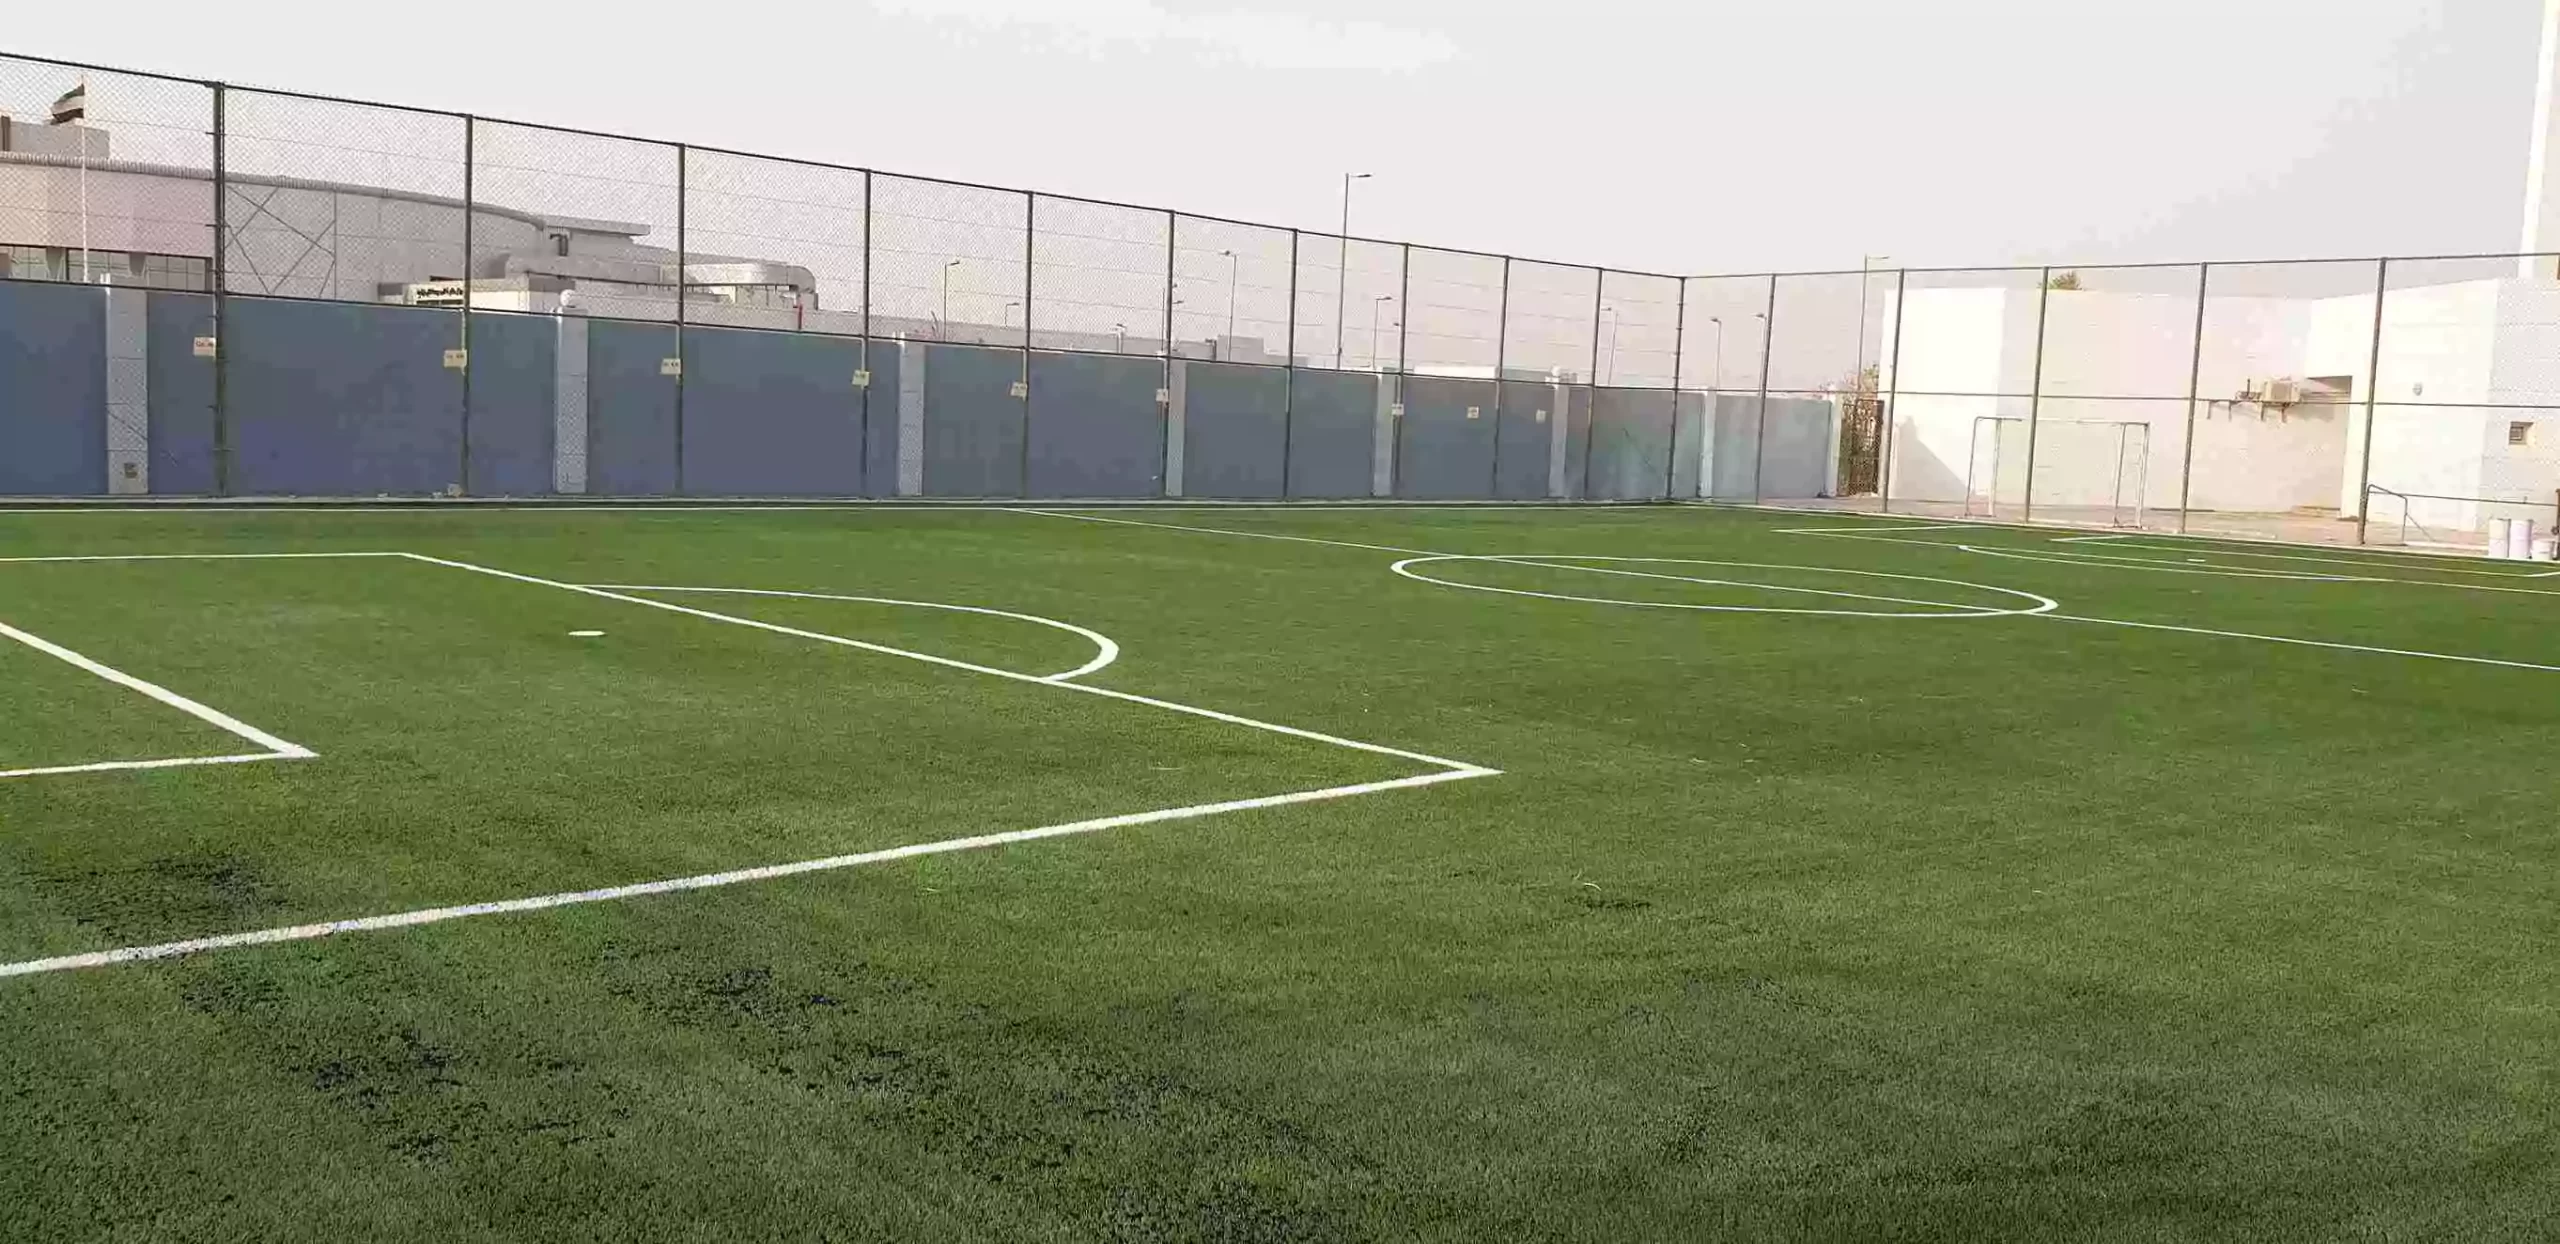 Artificial turf solutions for multi-sport courts in UAE schools.